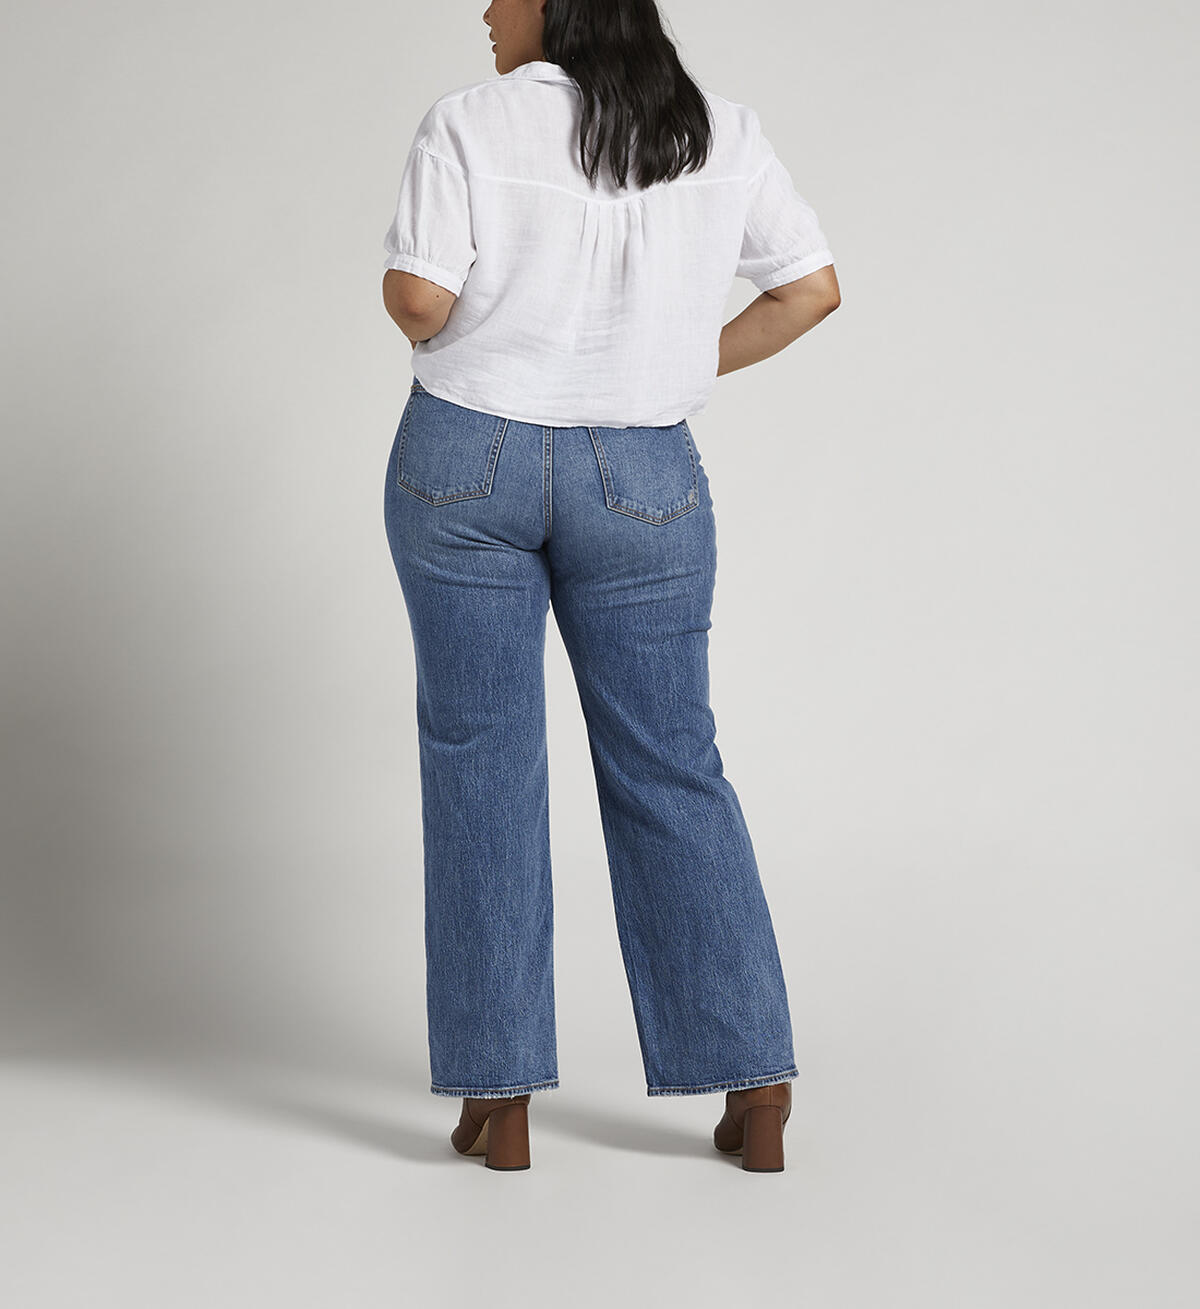 Highly Desirable High Rise Trouser Leg Jeans Plus Size, , hi-res image number 1